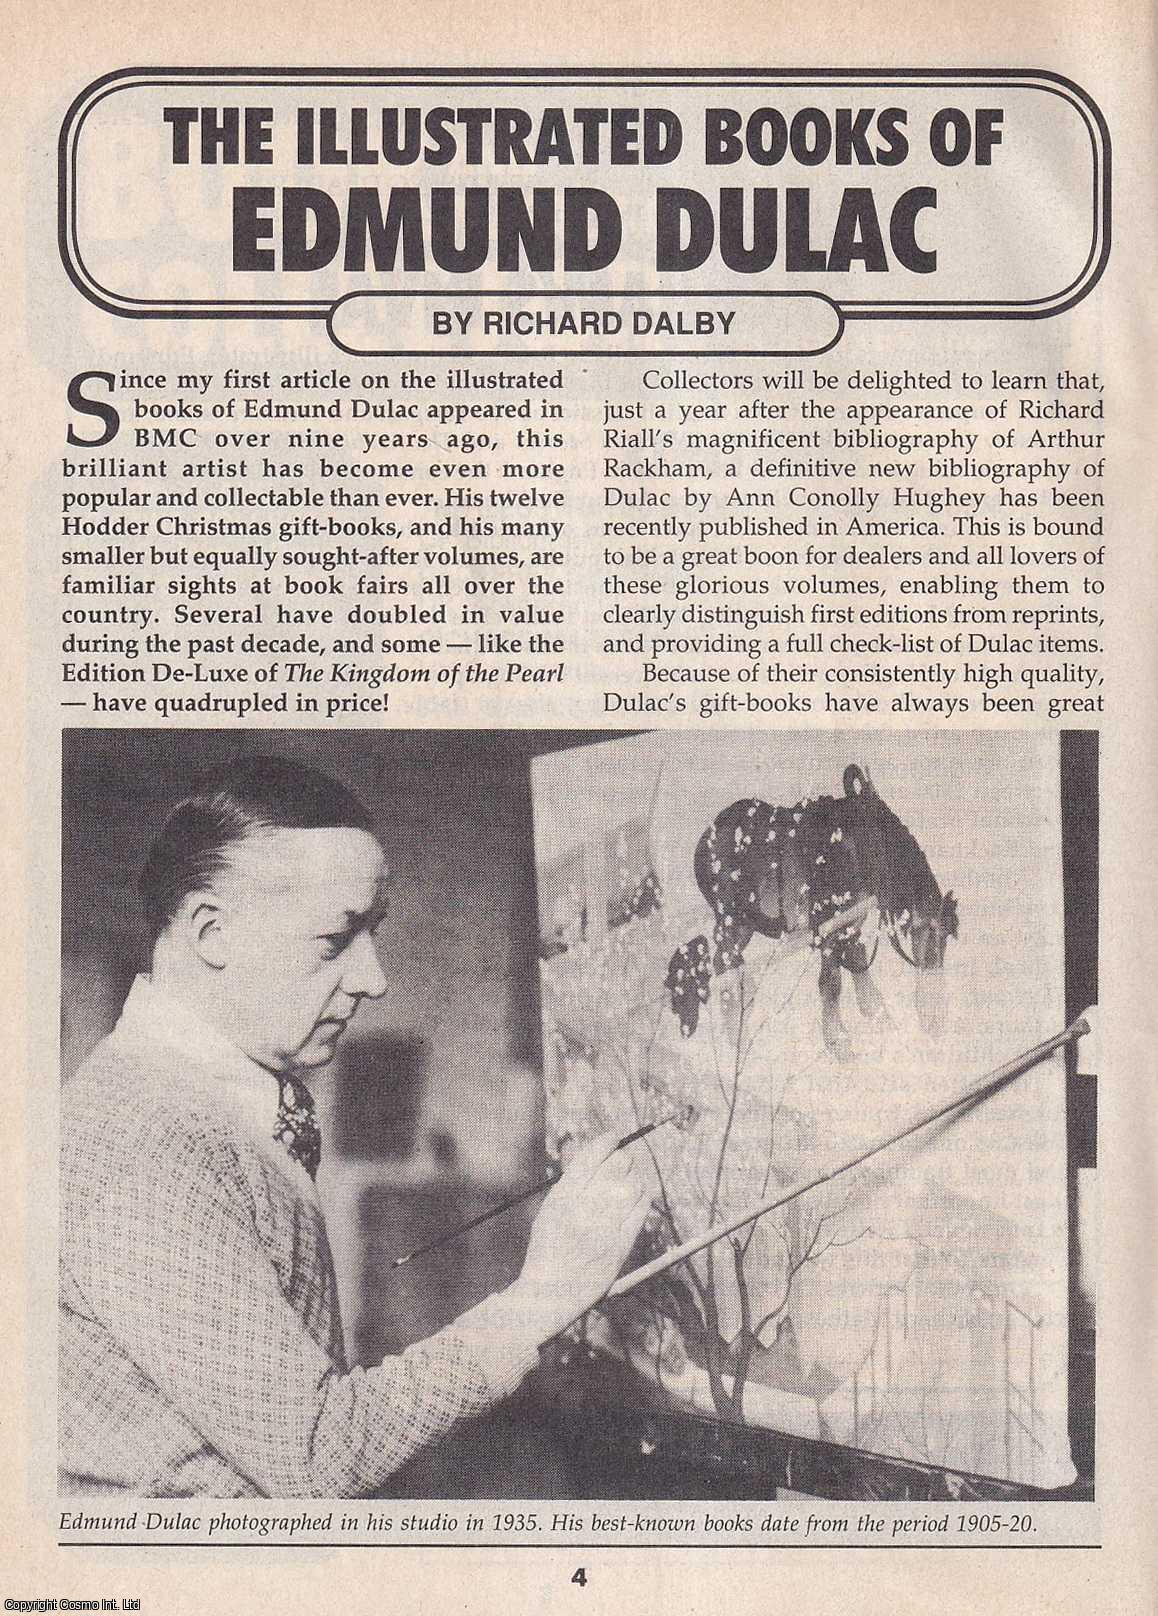 Richard Dalby - The Illustrated Books of Edmund Dulac, 1996. This is an original article separated from an issue of The Book & Magazine Collector publication.